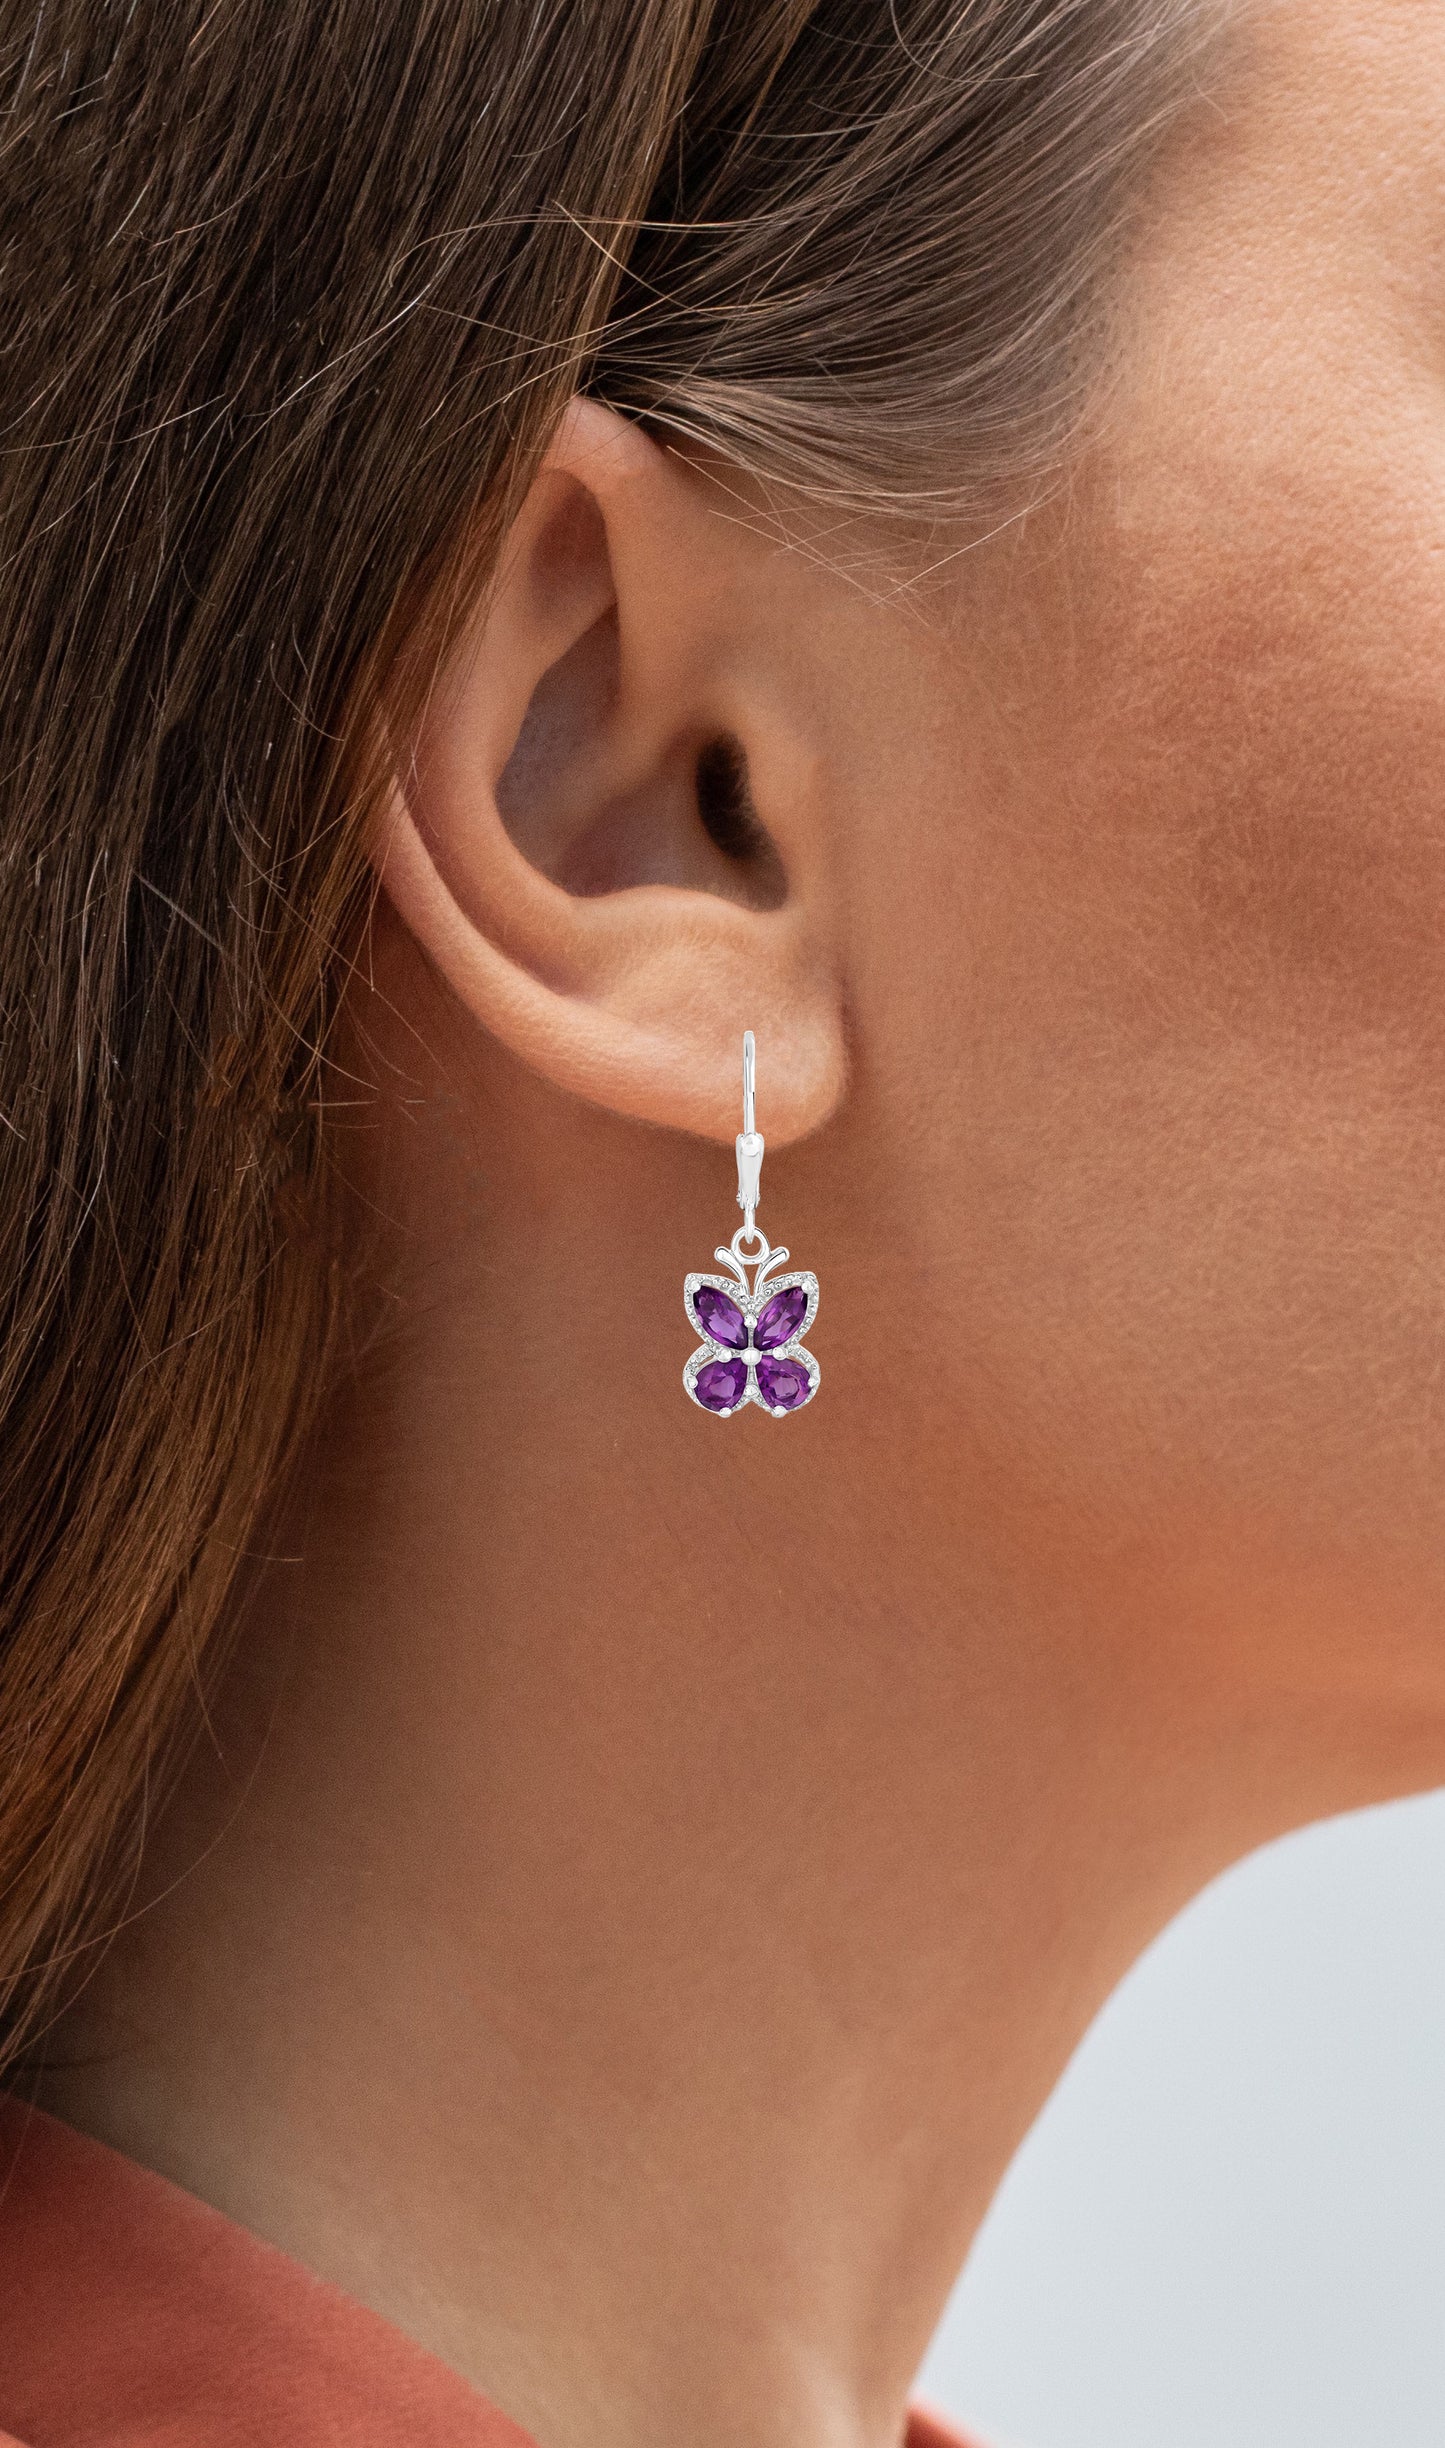 Amethyst Butterfly Earrings 2.12 Carats Rhodium Plated Sterling Silver